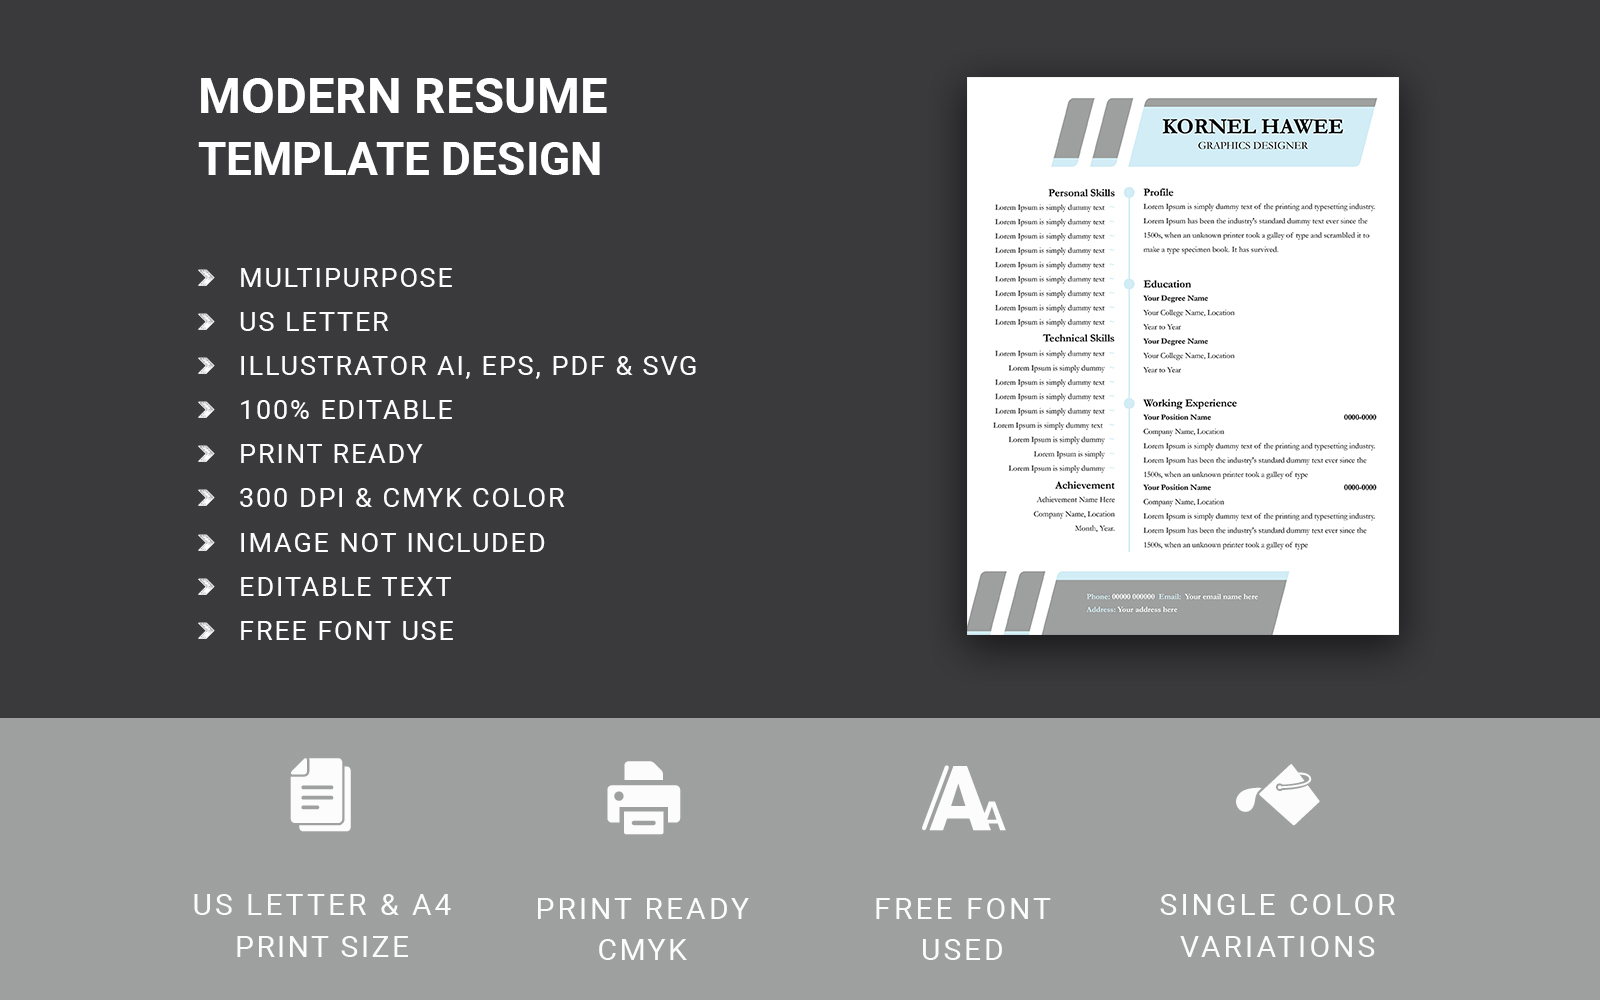 Unique Creative Resume Template Design – Capture Attention with Style